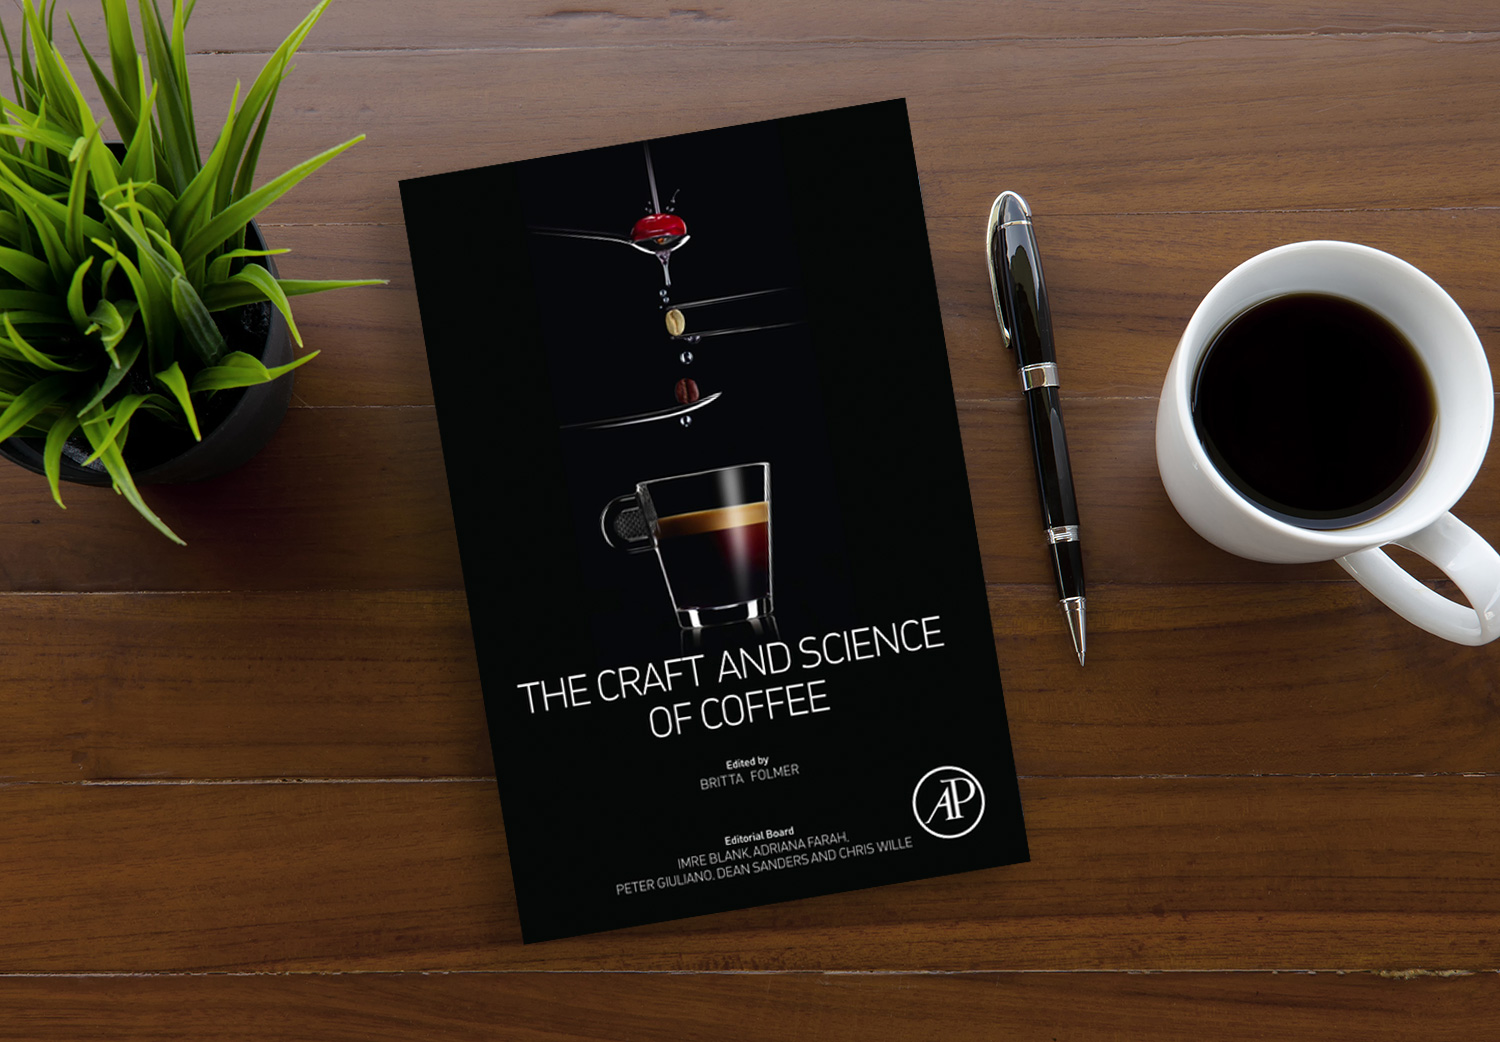 https://www.themanual.com/wp-content/uploads/sites/9/2019/05/coffee-books-craft-and-science-of-coffee.jpg?fit=800%2C800&p=1